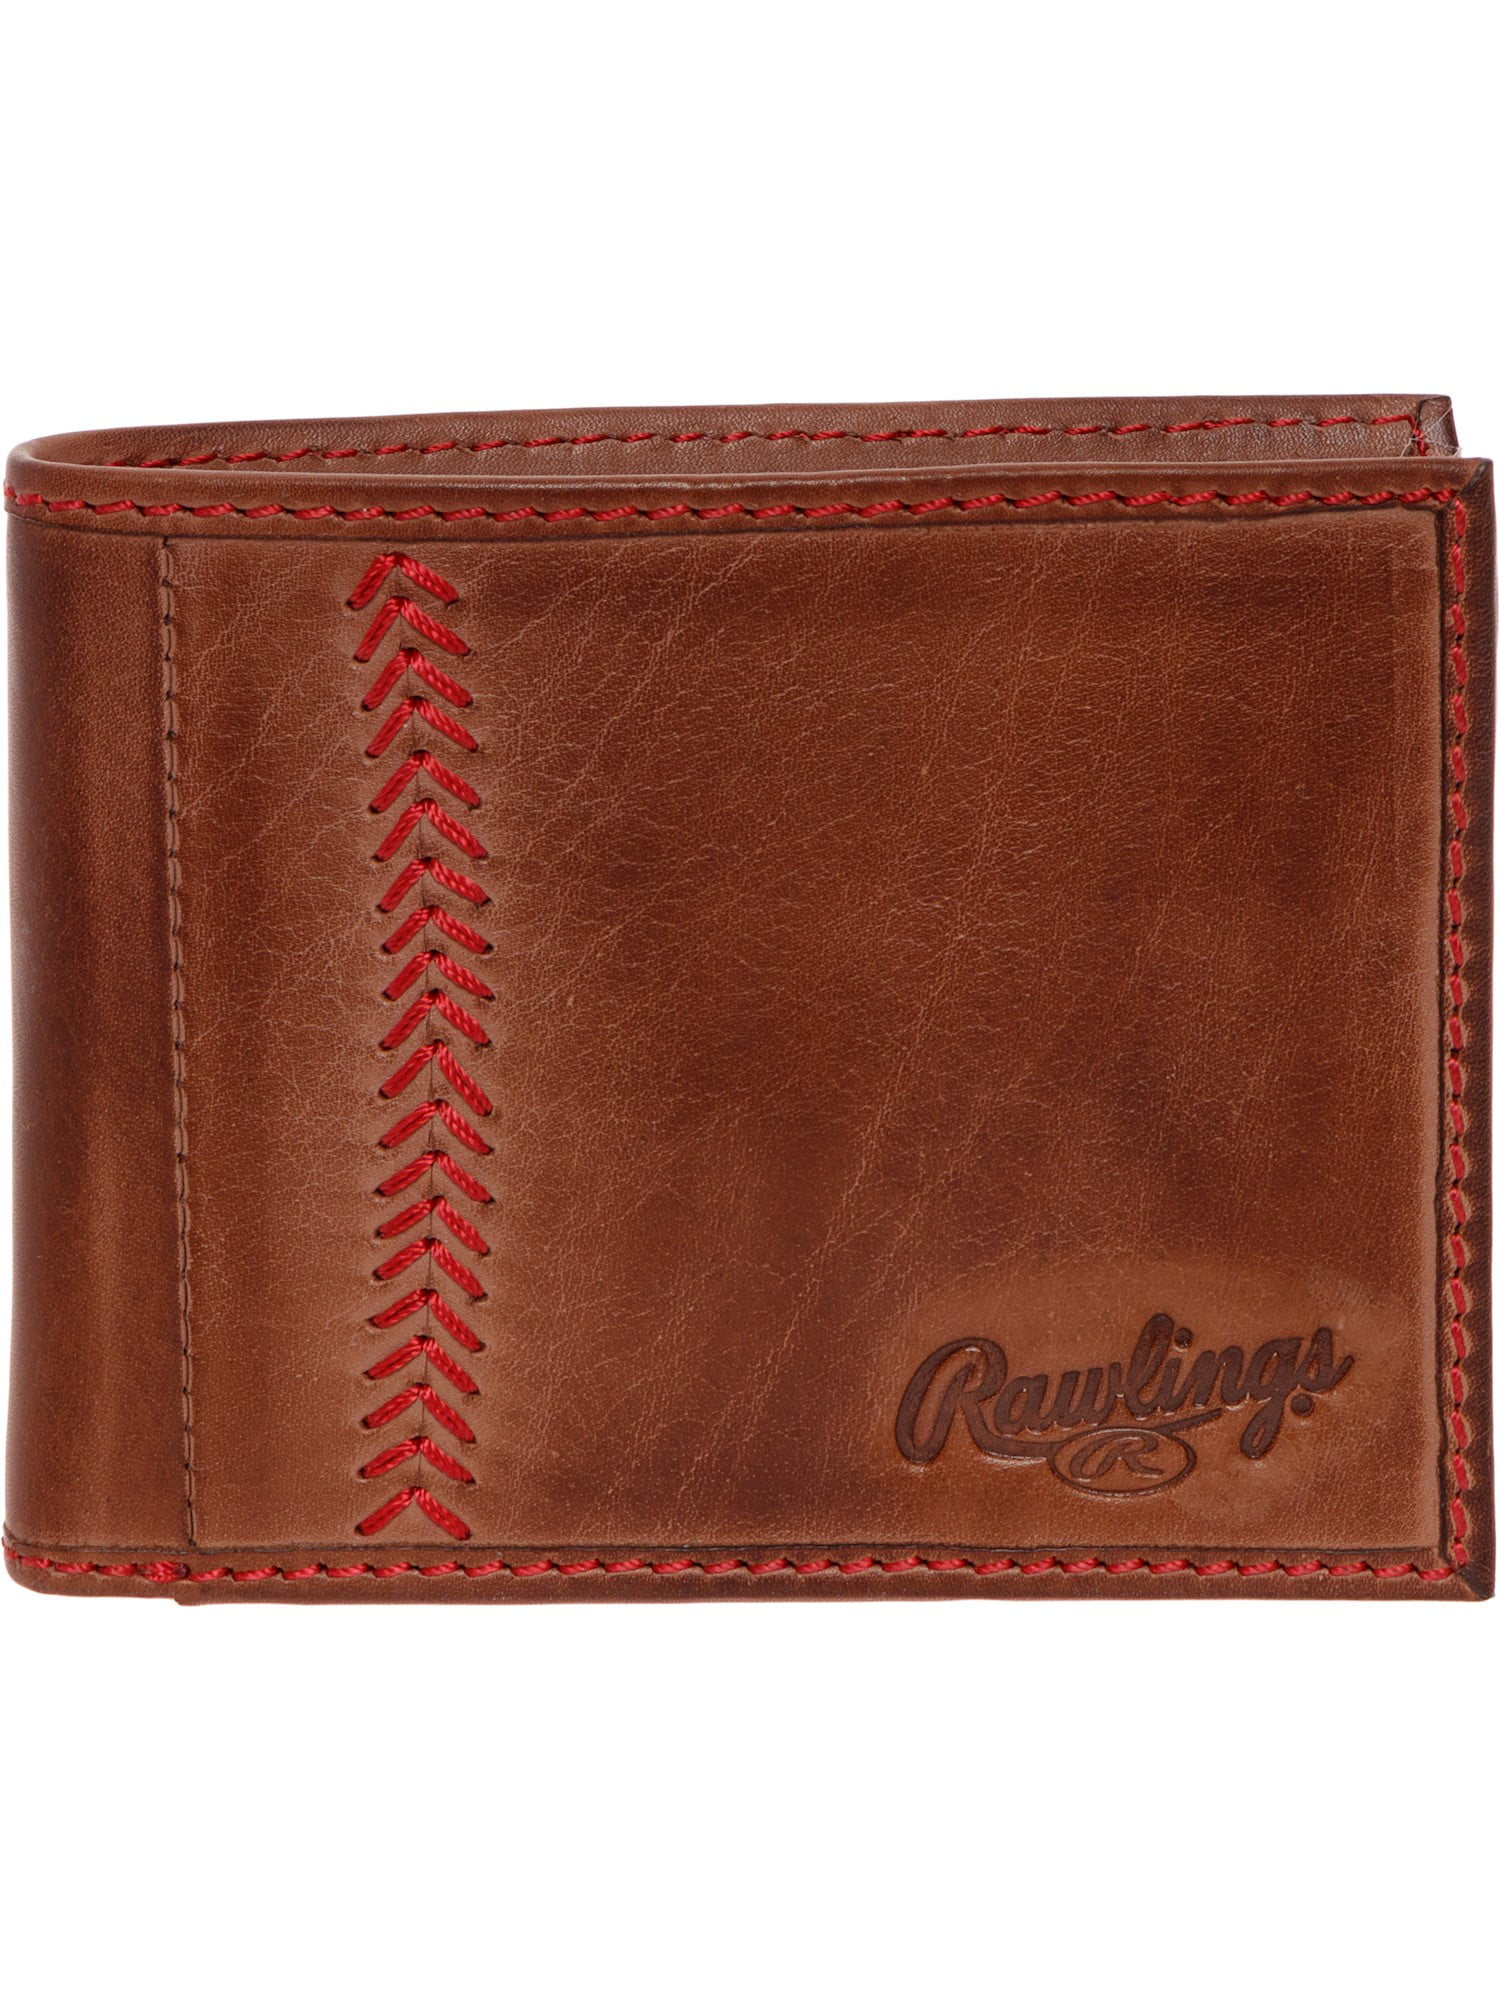 Rawlings Mens Tanned-leather Baseball Stitch Embroidered Wallet Light Brown 